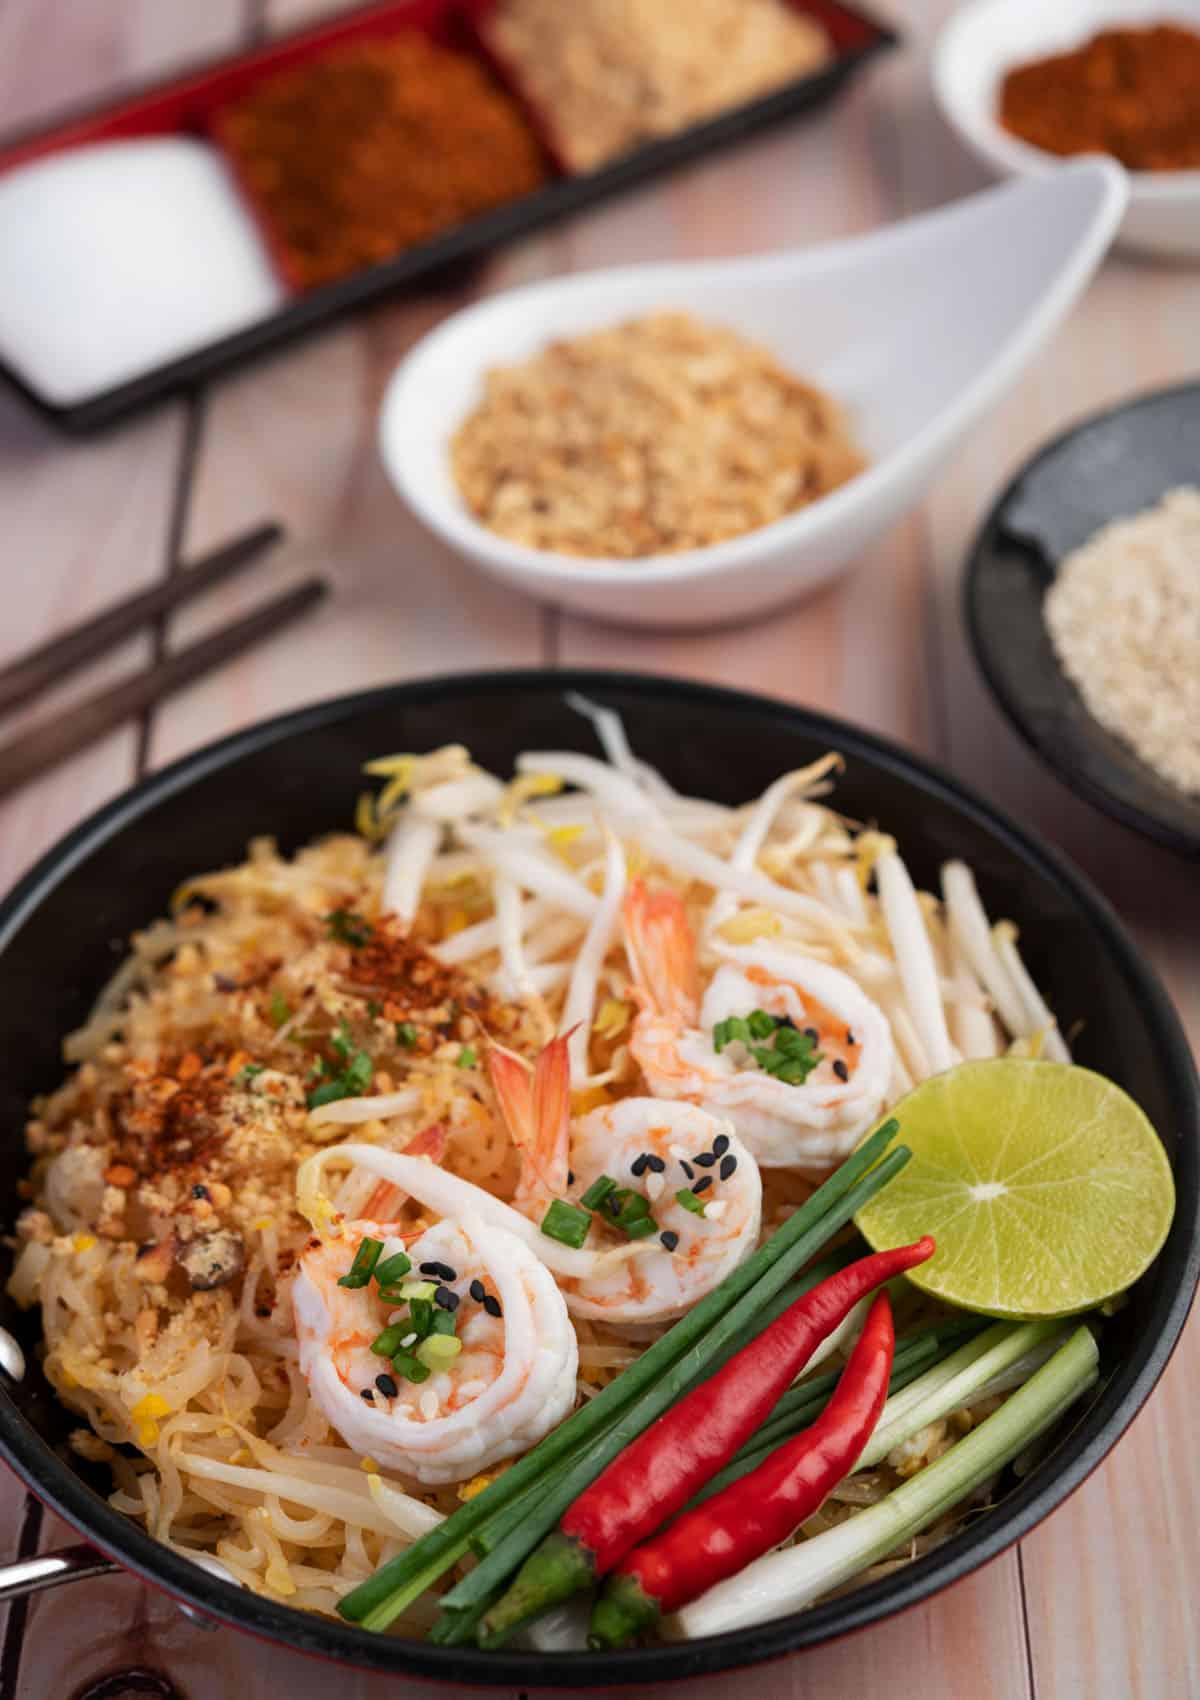 This Pad Thai recipe combines the traditional flavors of sweet, salty, sour, and spicy in pad thai for a truly delicious meal you can bring right into your kitchen - be sure to have your ingredients prepped and ready before you start!